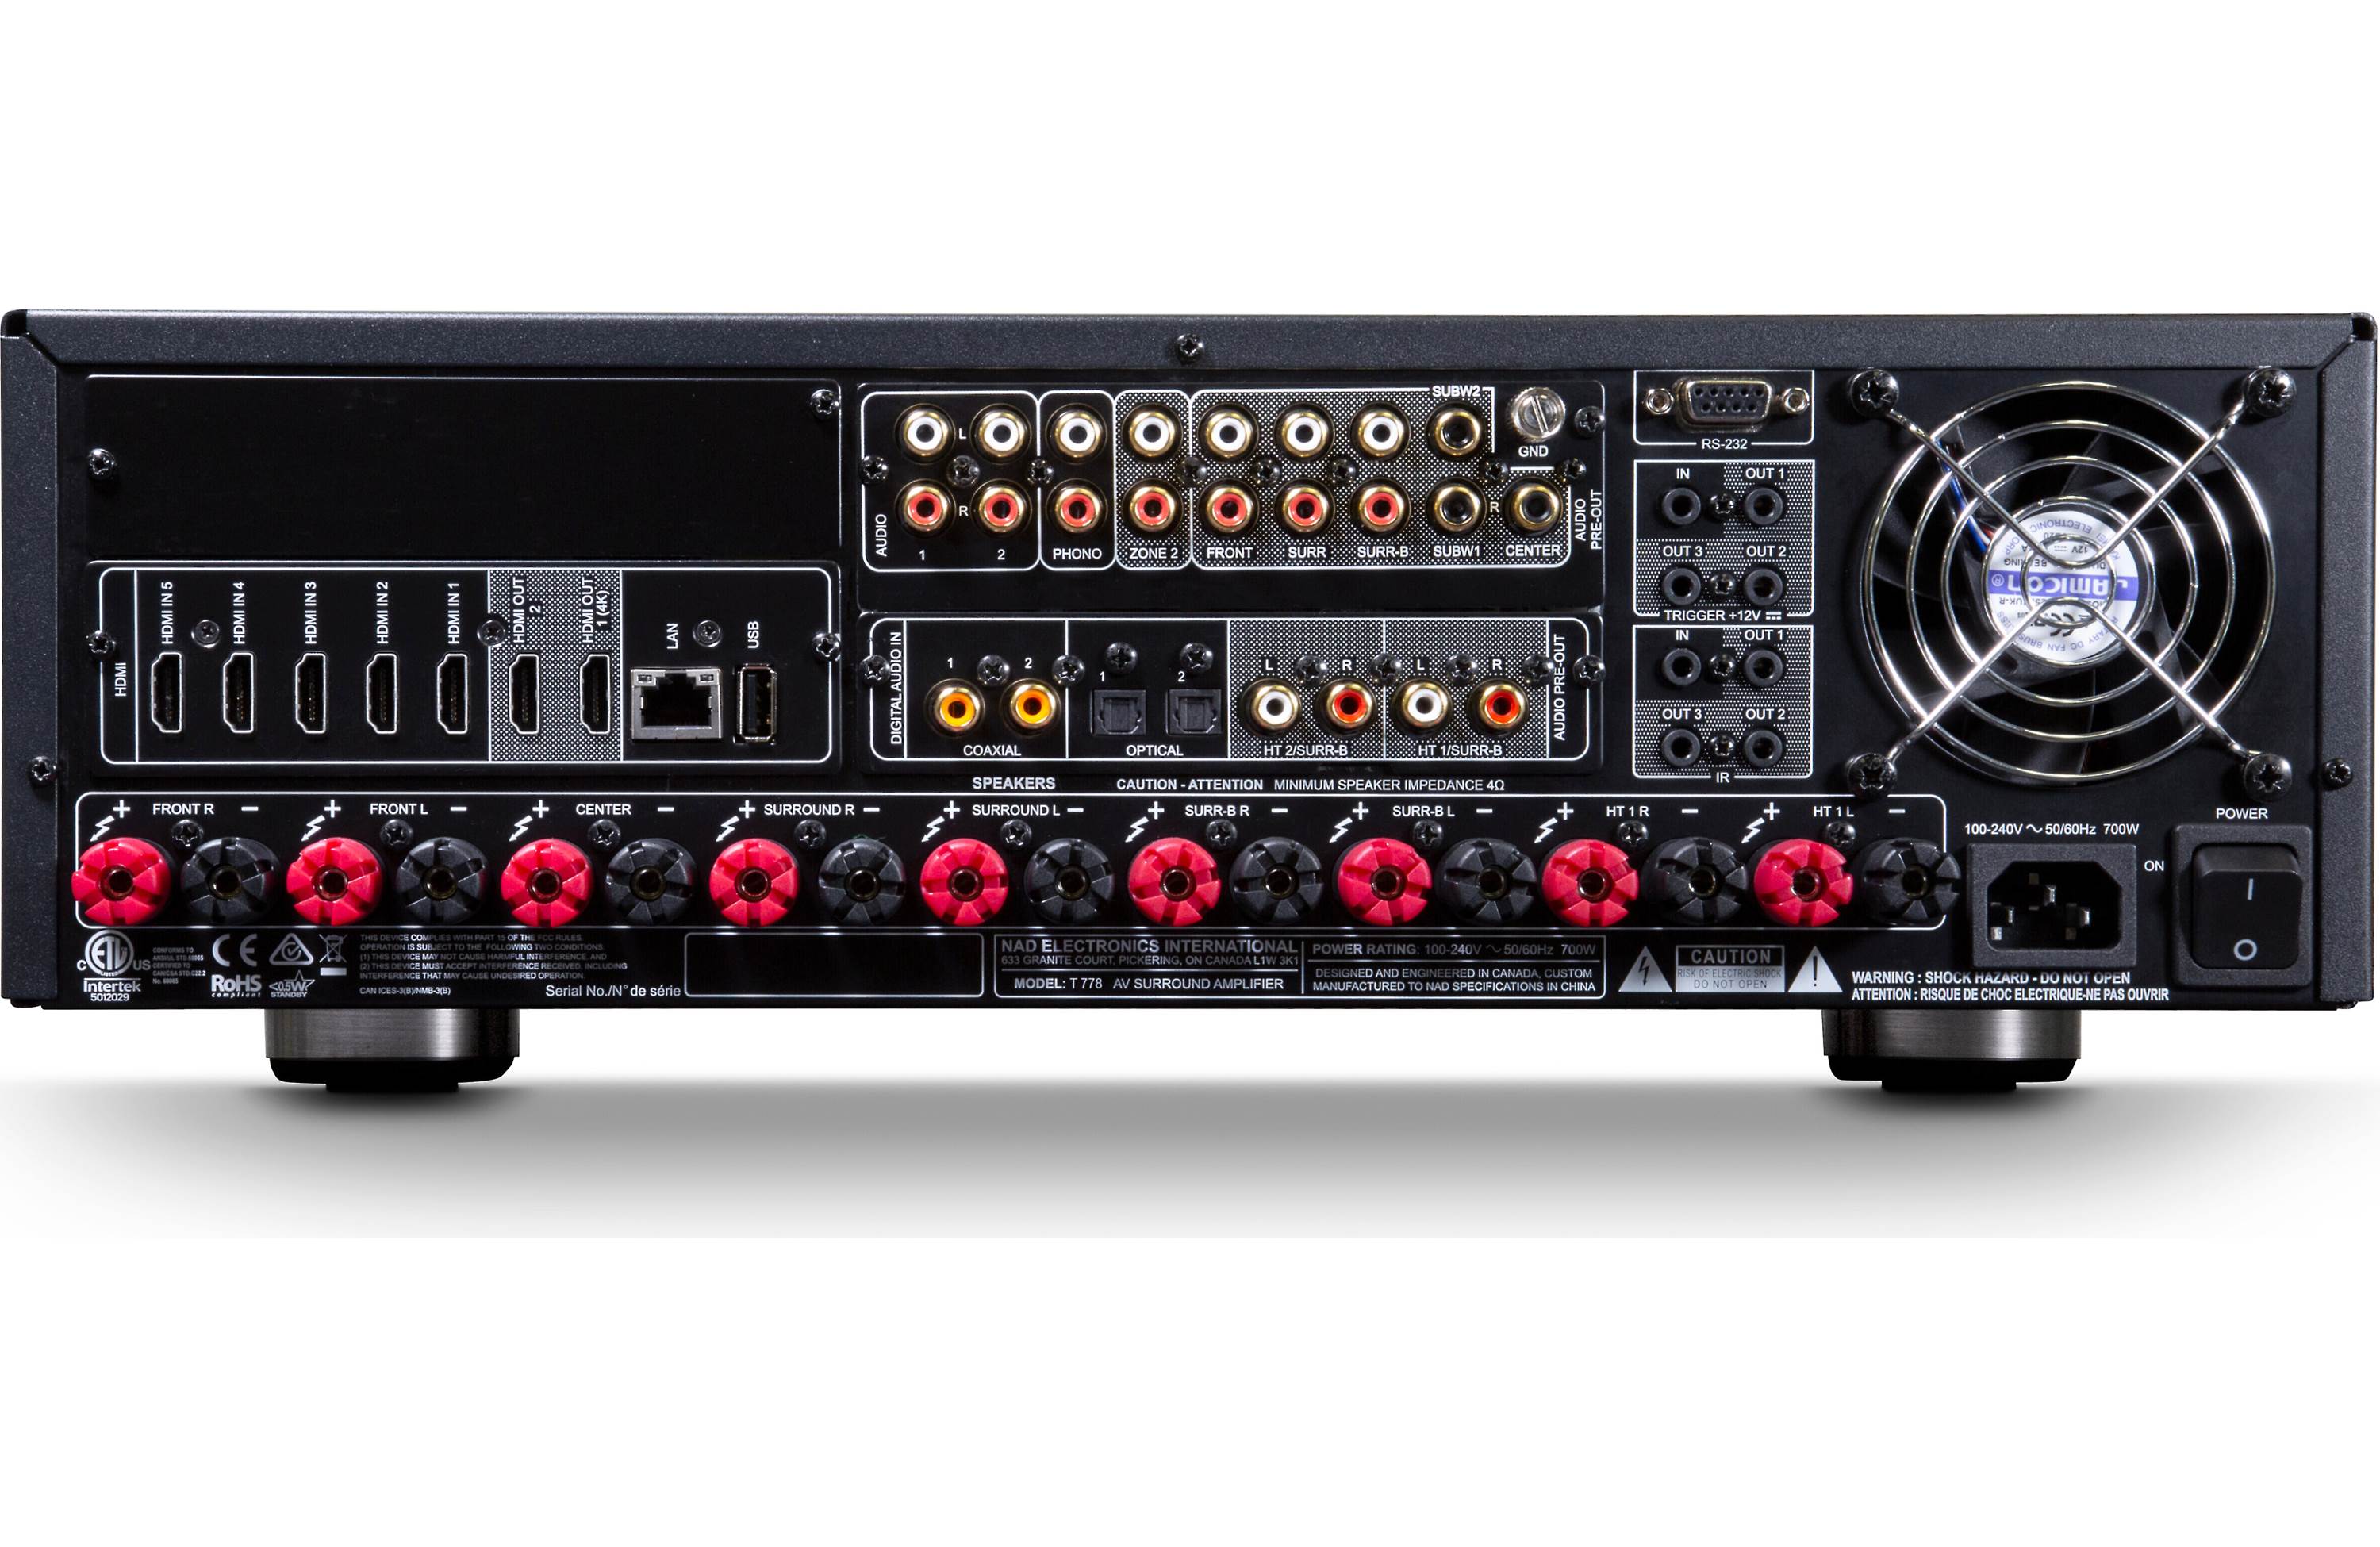 NAD T 778 9.2 A/V Surround Receiver